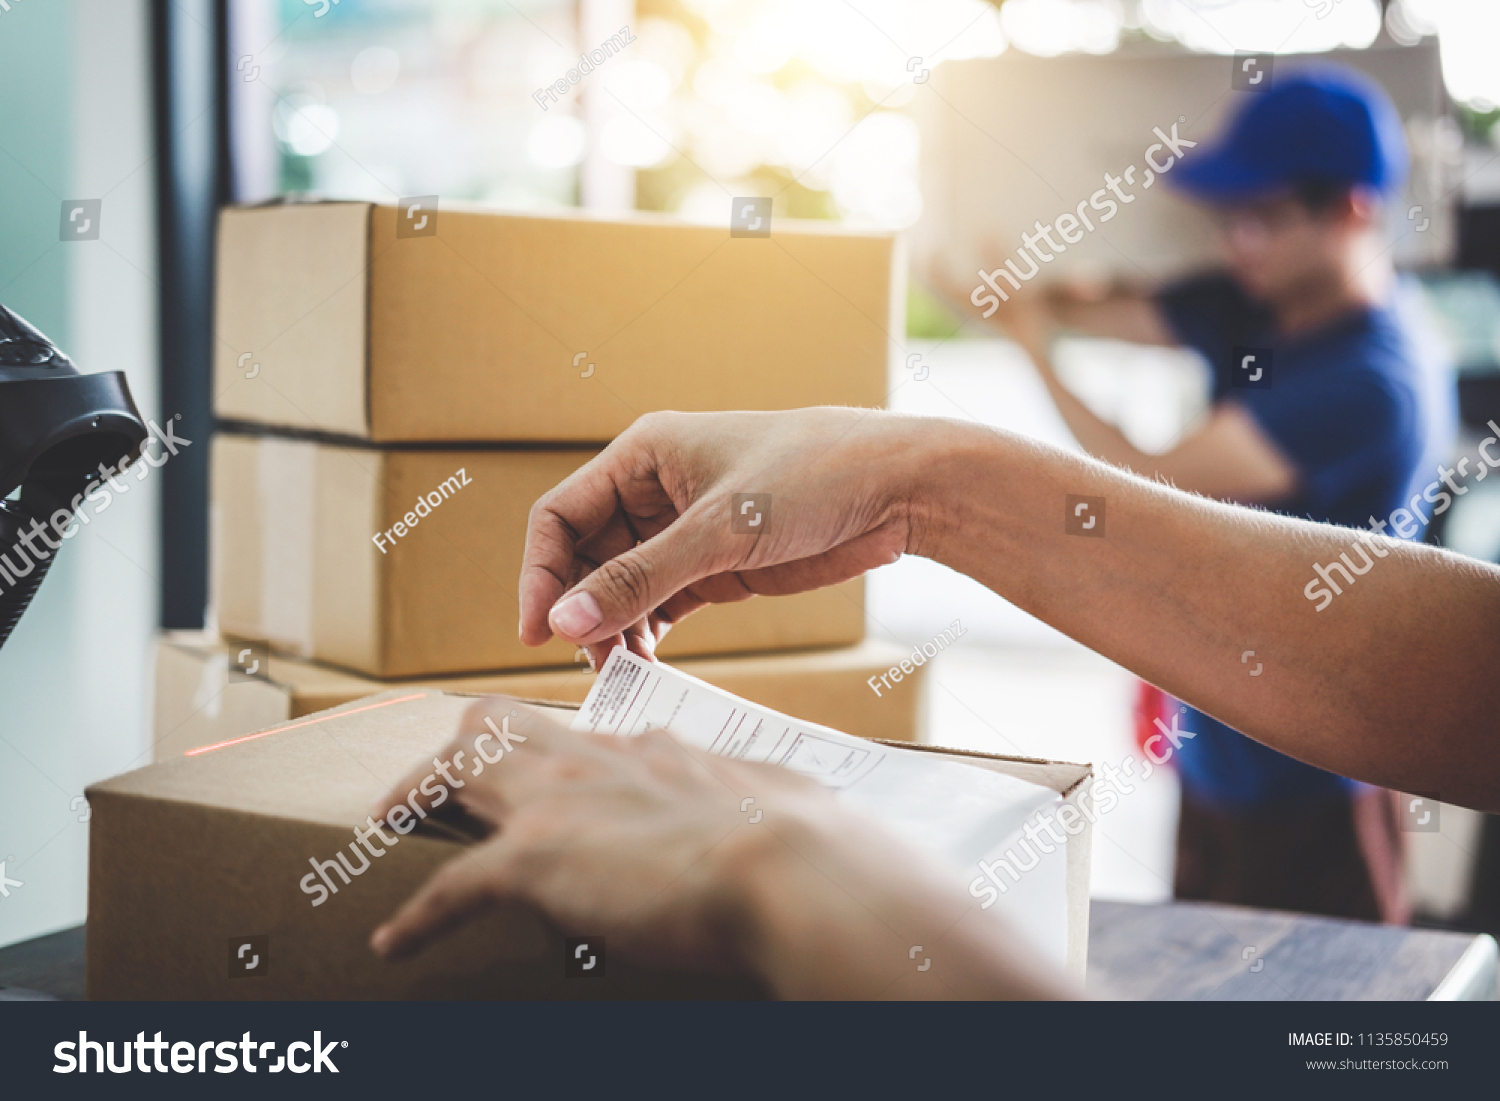 Home delivery service and working service mind, Woman working barcode scan to confirm sending customer in post office. #1135850459